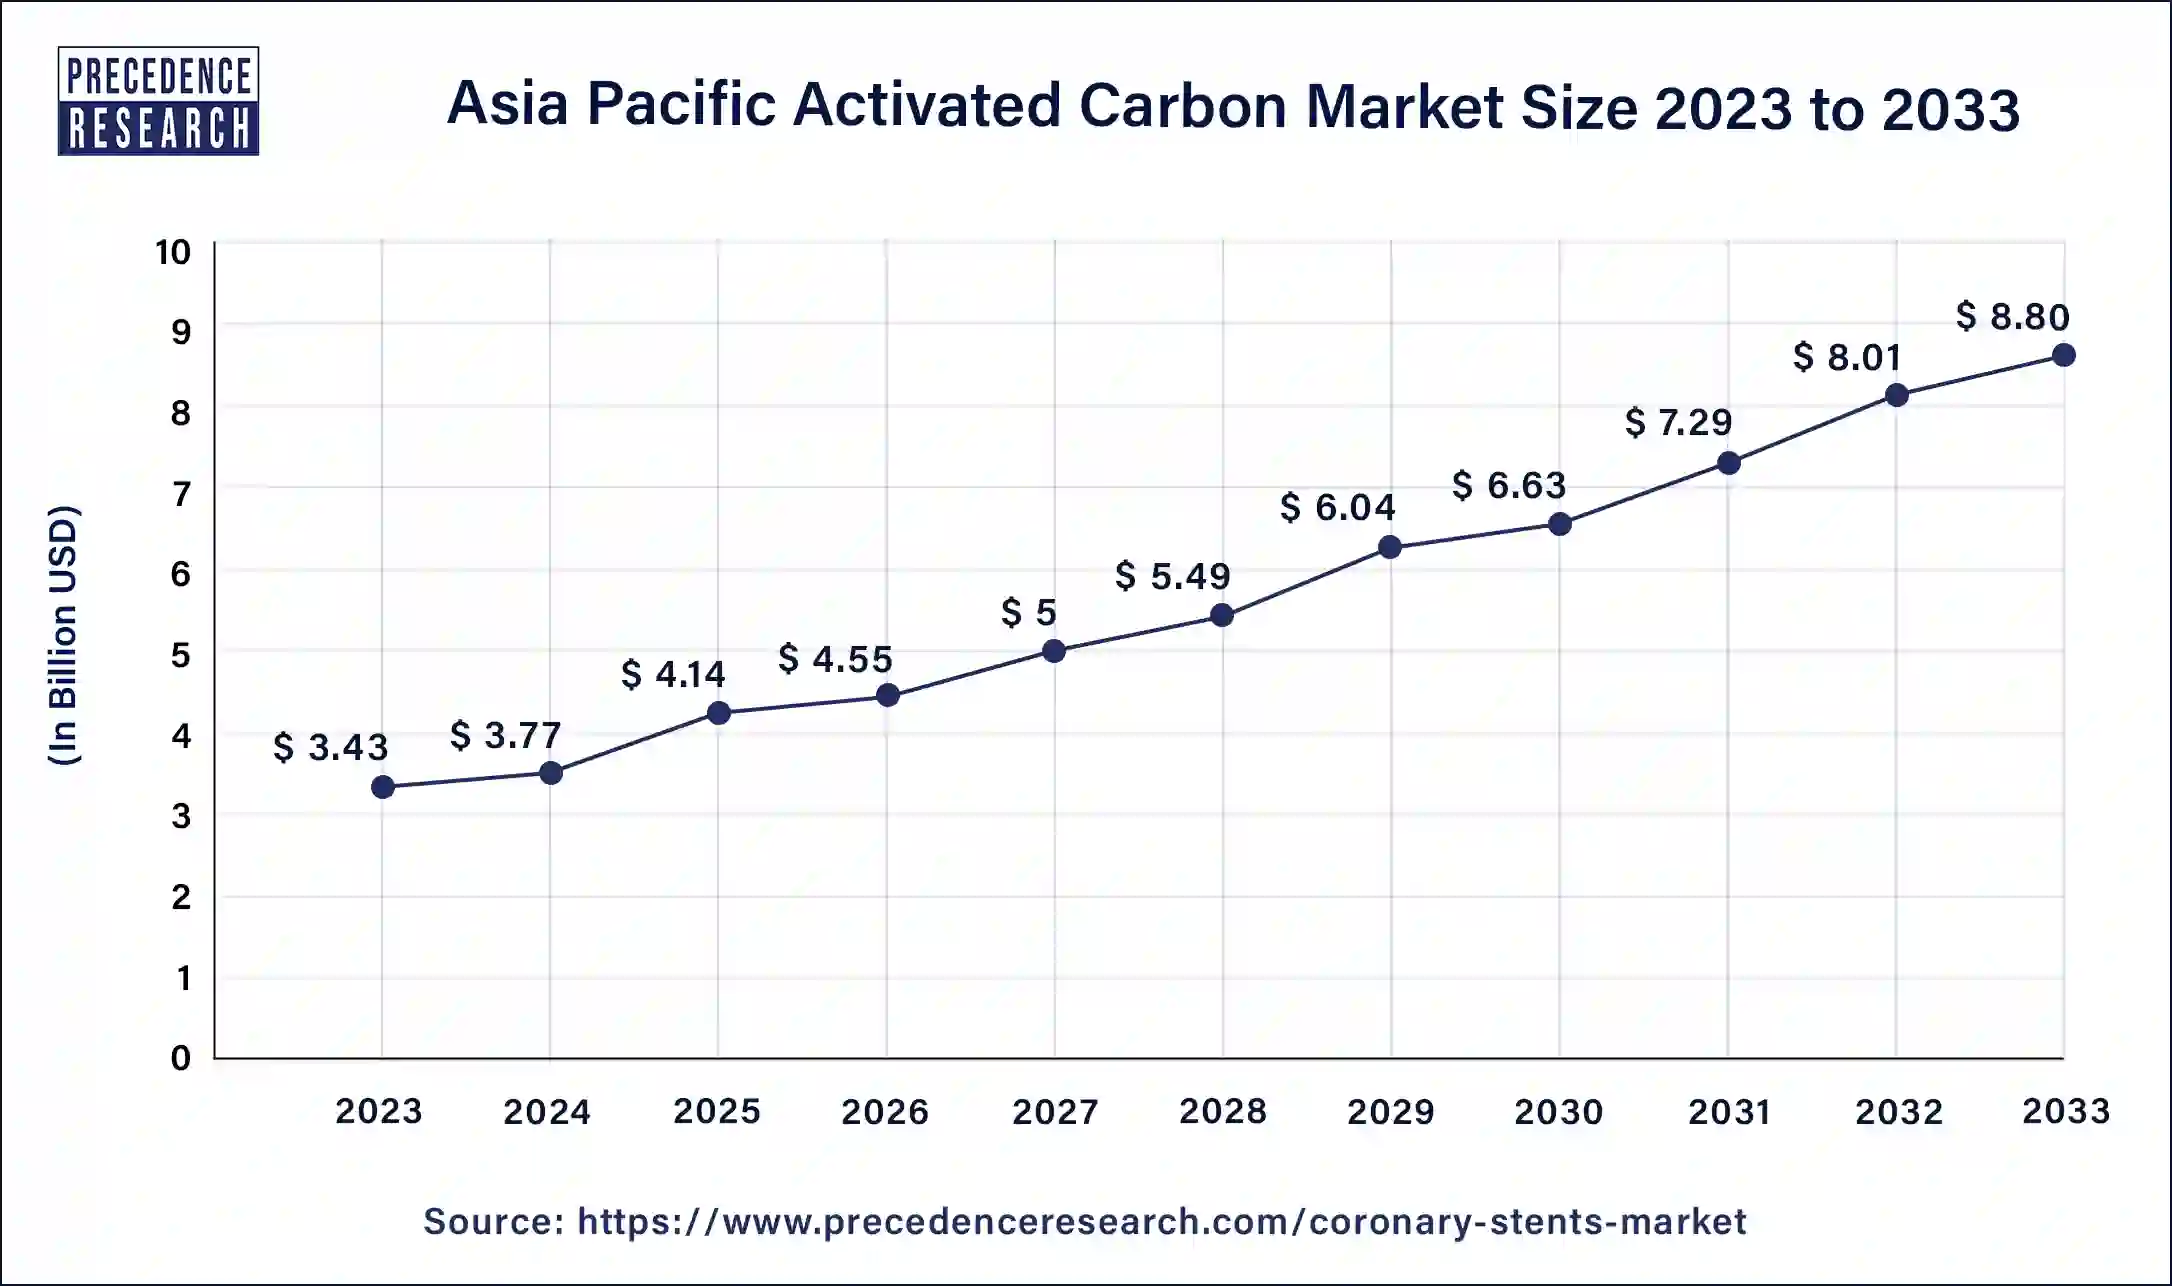 Asia Pacific Activated Carbon Market Size 2024 to 2033